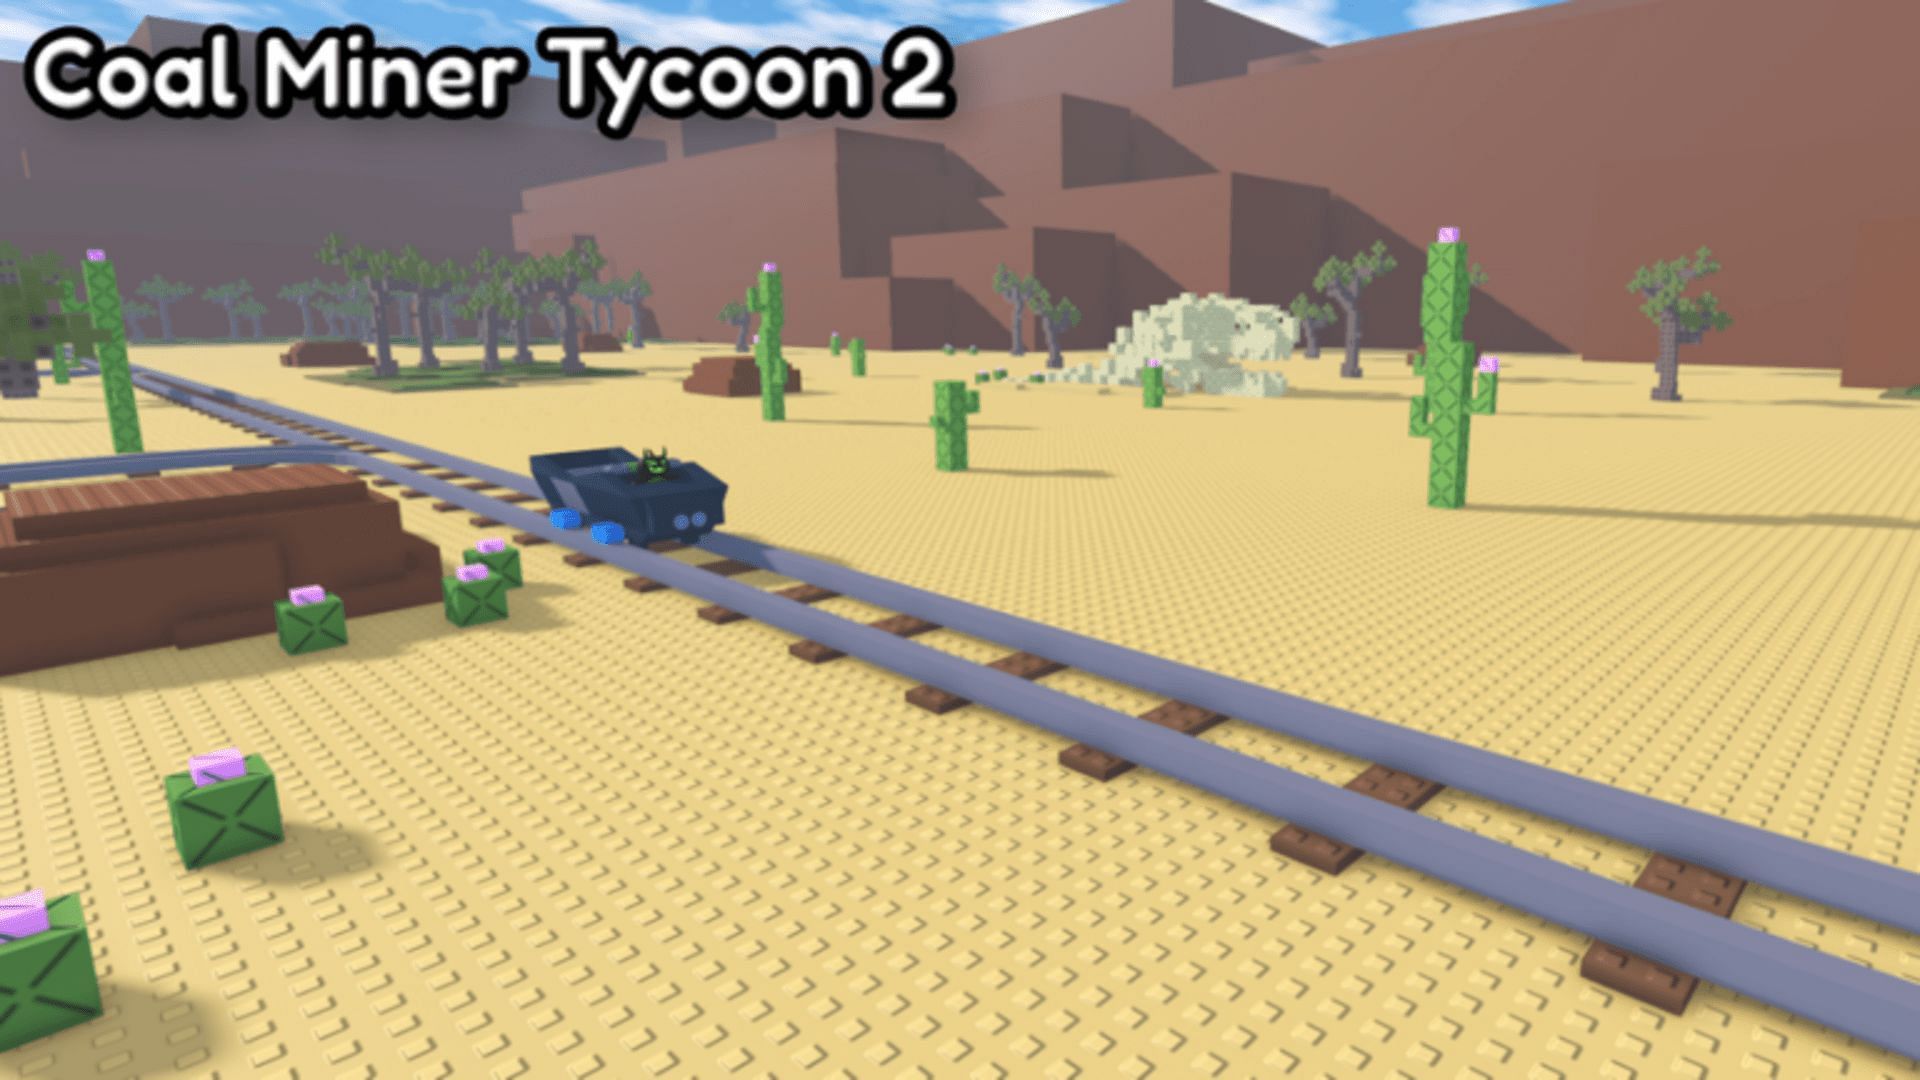 Inactive codes for Coal Miner Tycoon 2 (Image via Roblox)